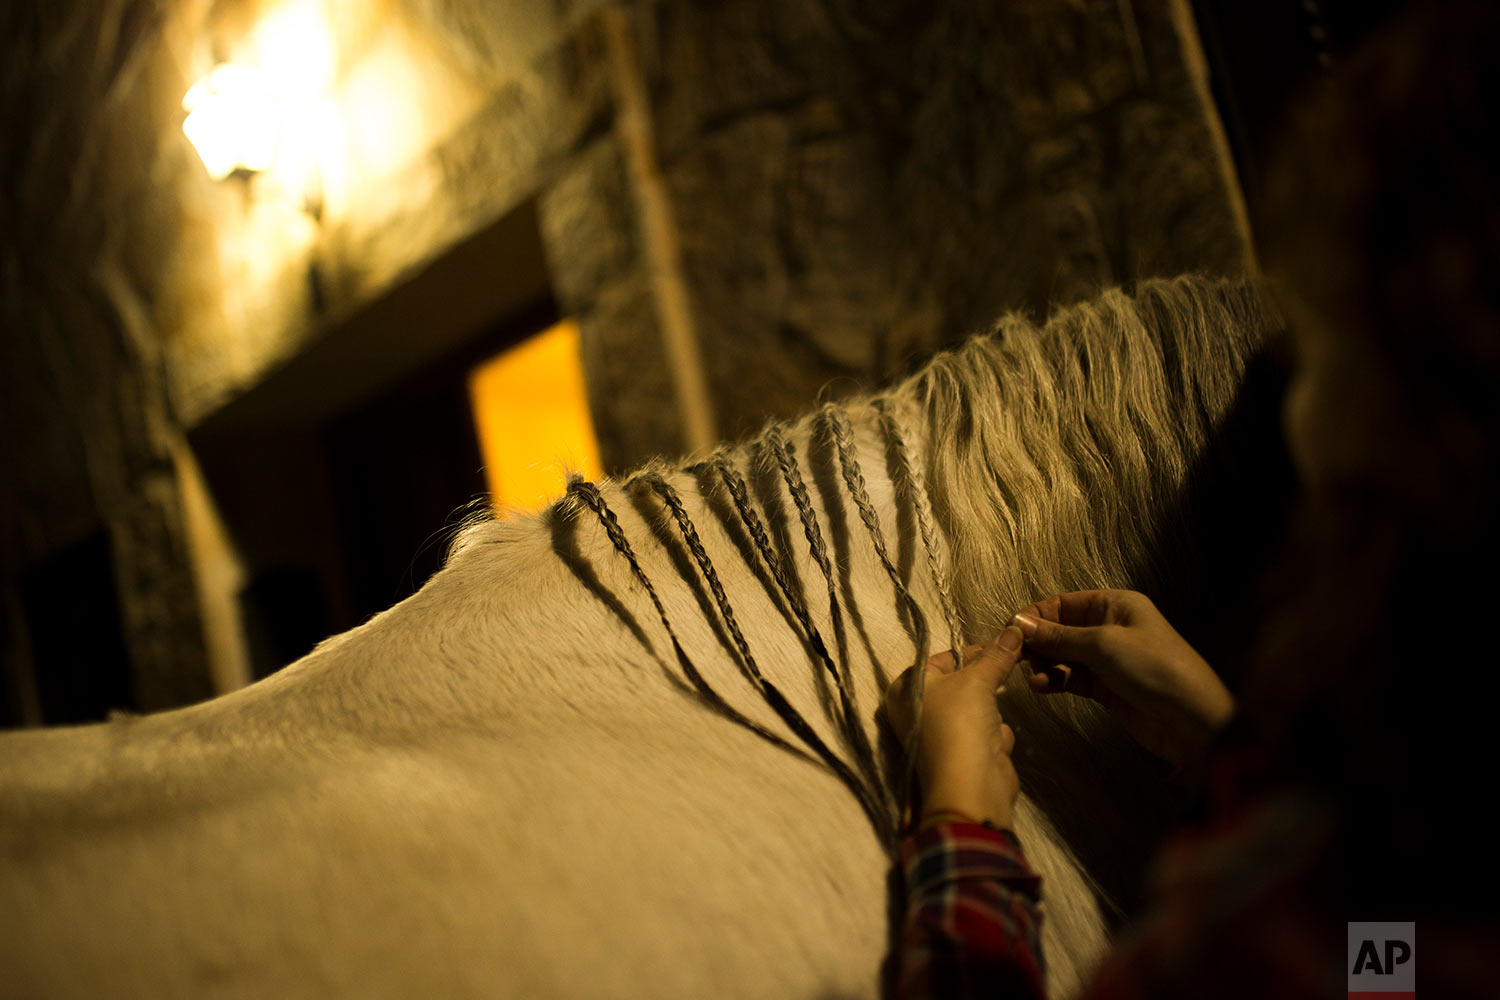  A woman braids the hair of a horse before the ritual in honor of Saint Anthony the Abbot, the patron saint of animals, in San Bartolome de Pinares, Spain, Tuesday, Jan. 16, 2018. (AP Photo/Francisco Seco)&nbsp;|&nbsp; See these photos on AP Images  